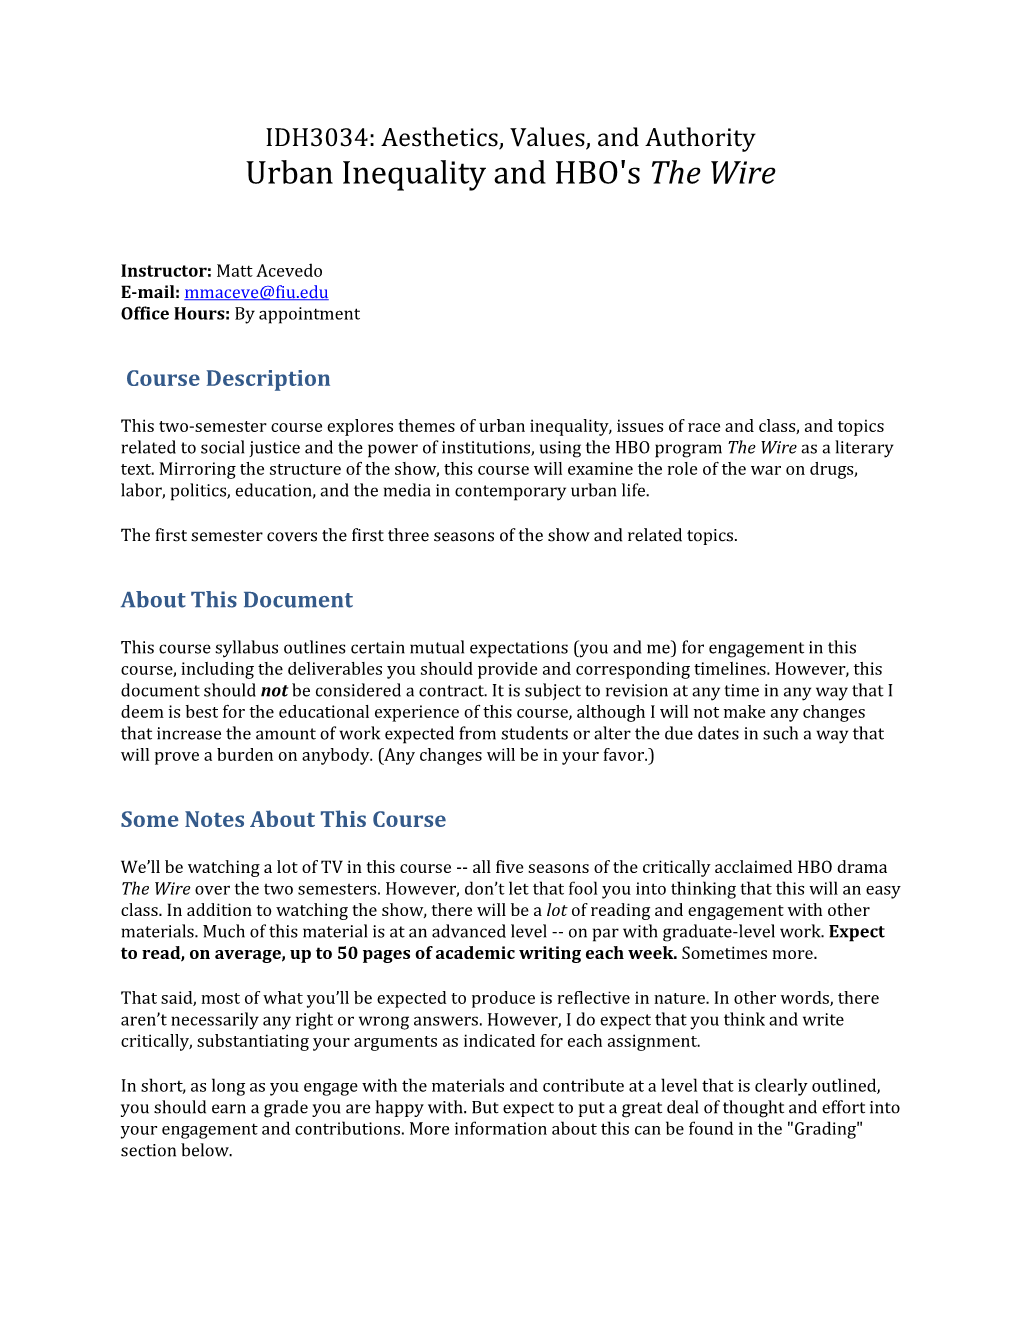 Urban Inequality and HBO's the Wire